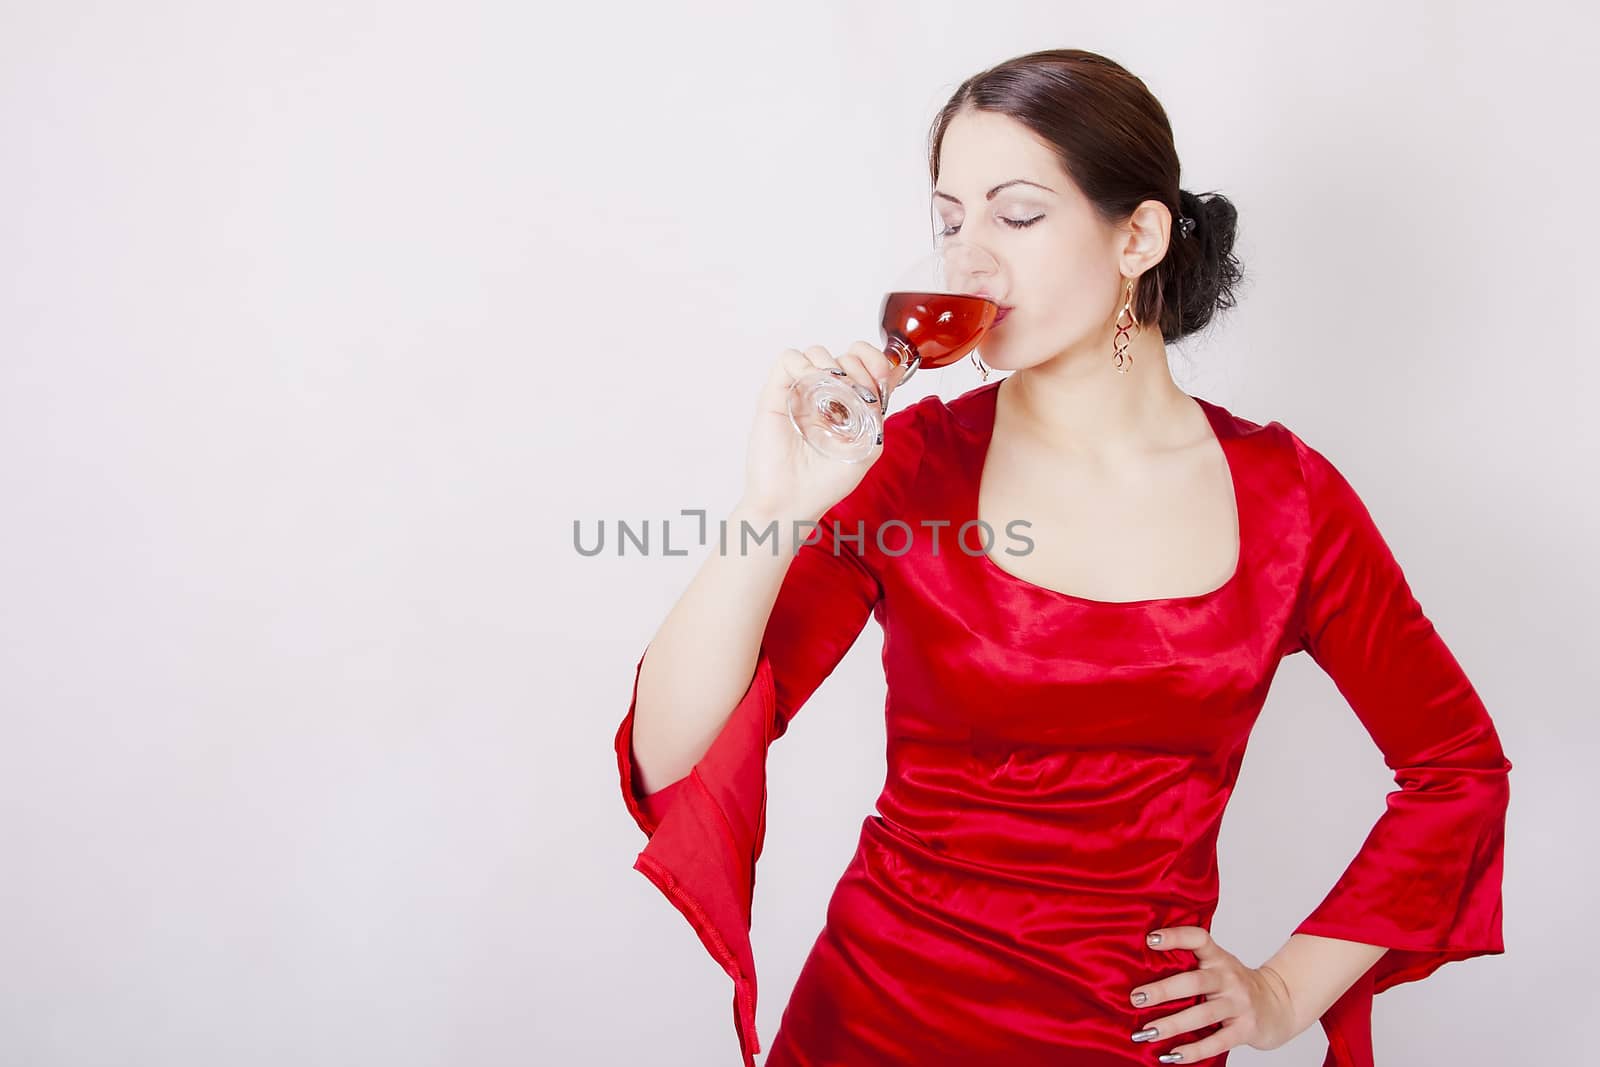 portrait of beautiful brunette with glass of red wine